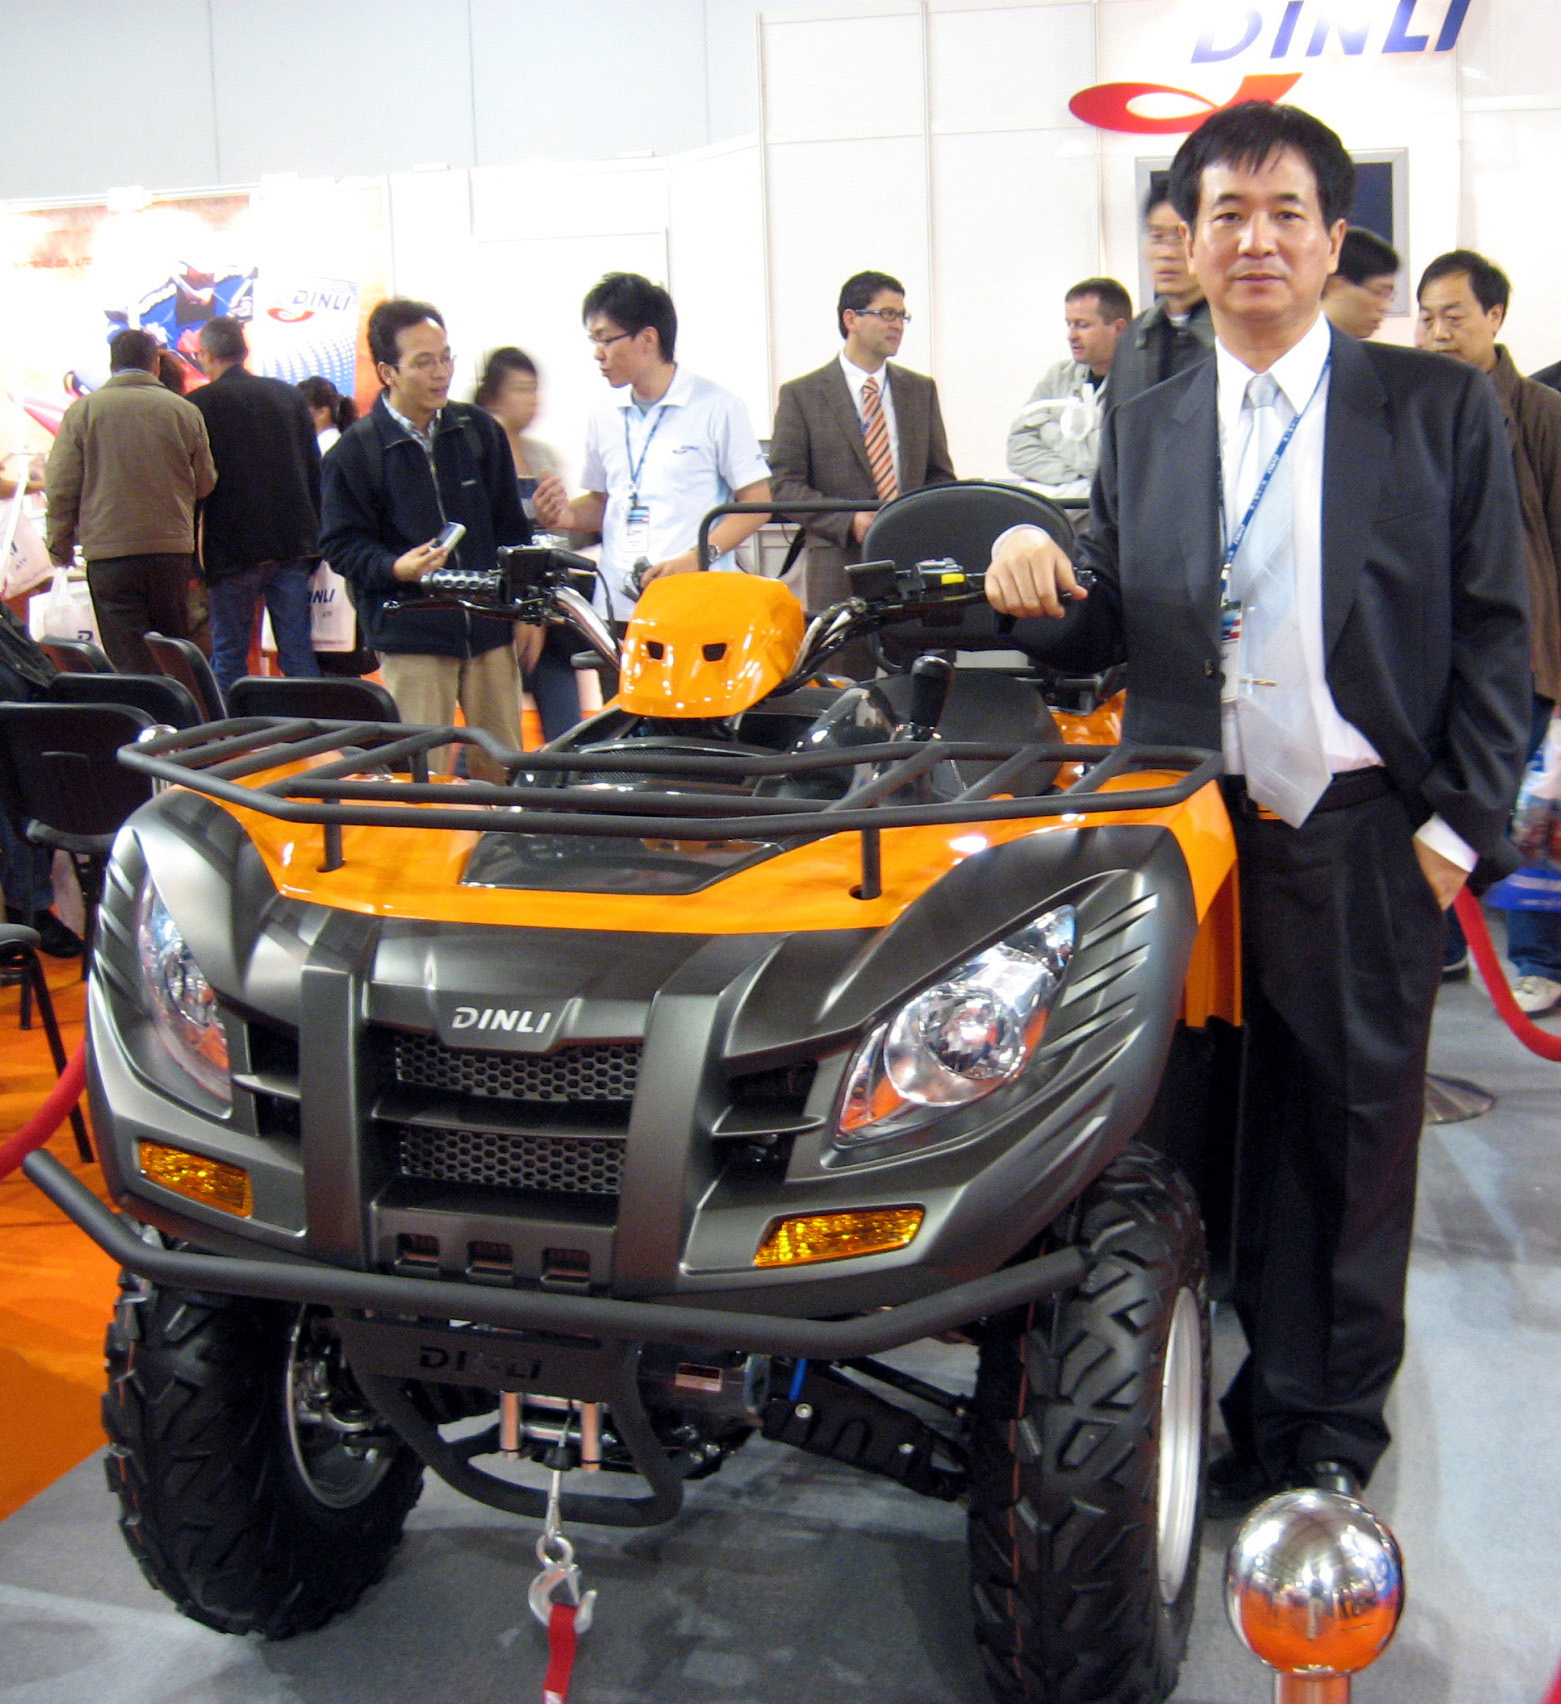 Dinli chairman T.Y. Lu at his company`s global premier of the 700cc utility ATV, the most powerful model of its type currently made in Taiwan